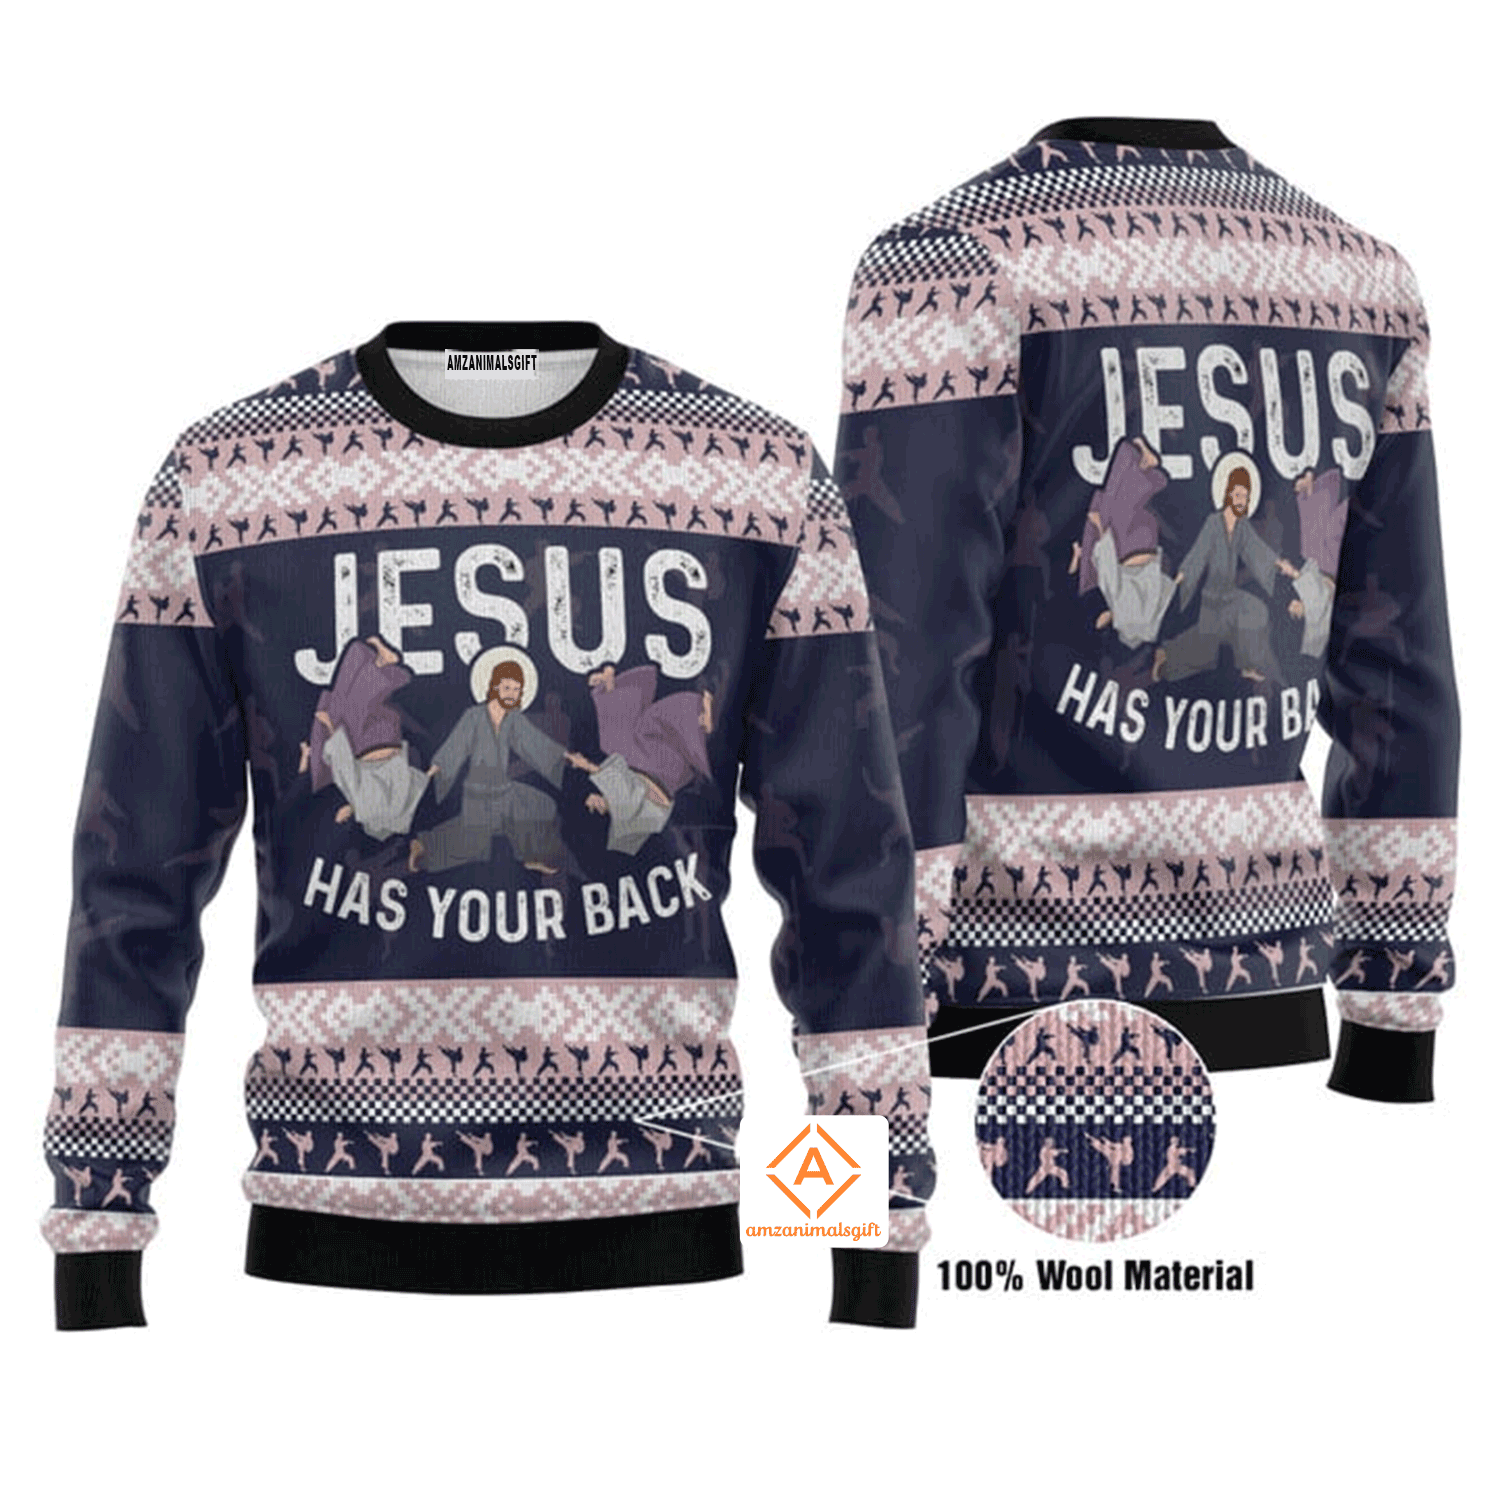 Jesus Christmas Sweater Has Your Back Jiu Jitsu, Ugly Sweater For Men & Women, Perfect Outfit For Christmas New Year Autumn Winter